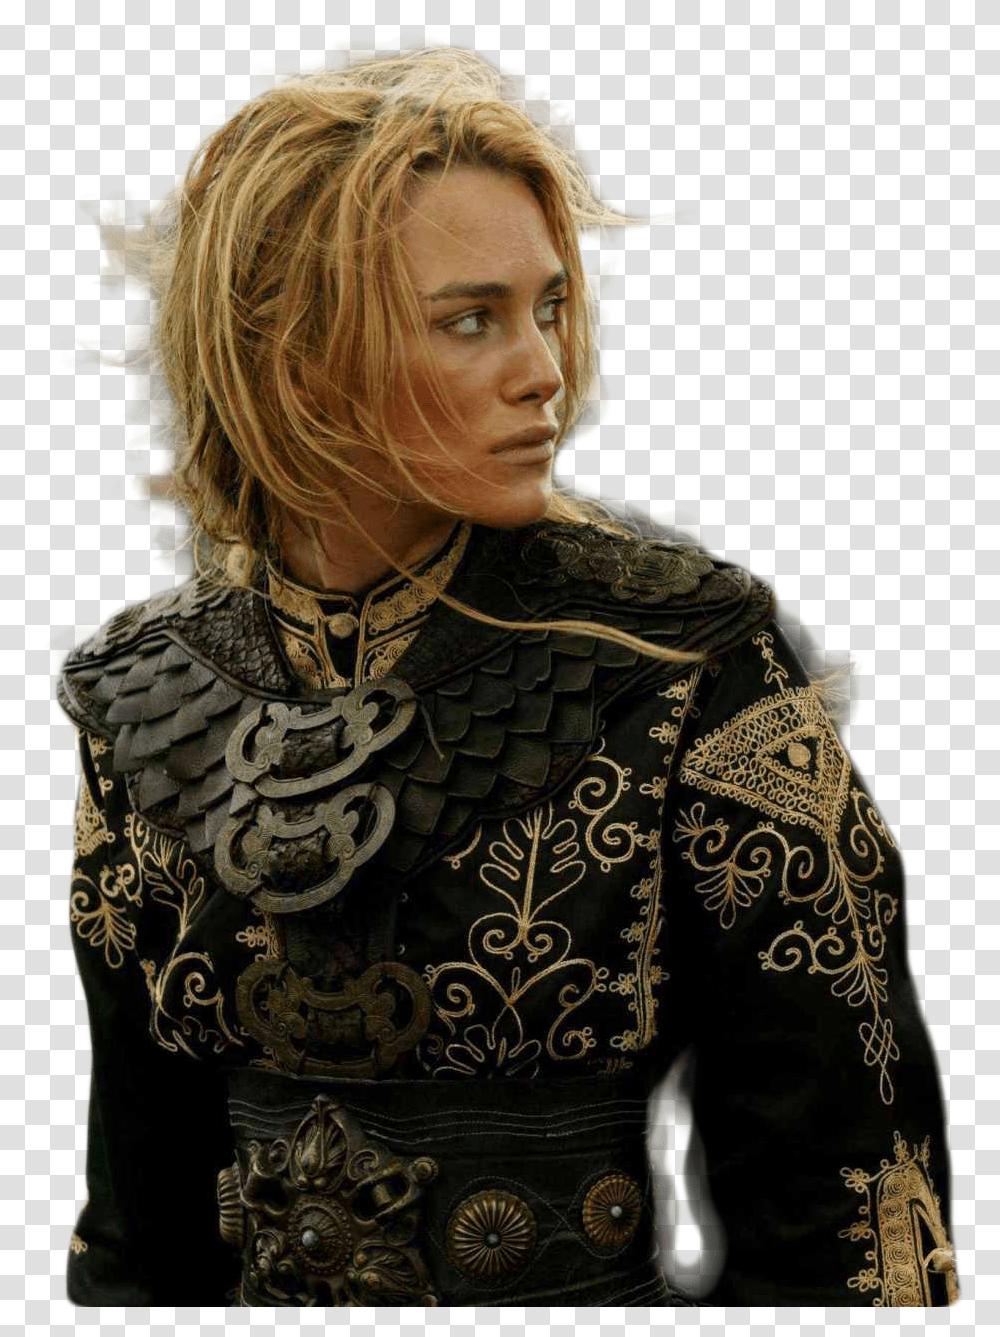 Keira Knightley Picture Arts Keira Knightley Pirates Of The Caribbean Short Hair, Person, Costume, Clothing, Face Transparent Png